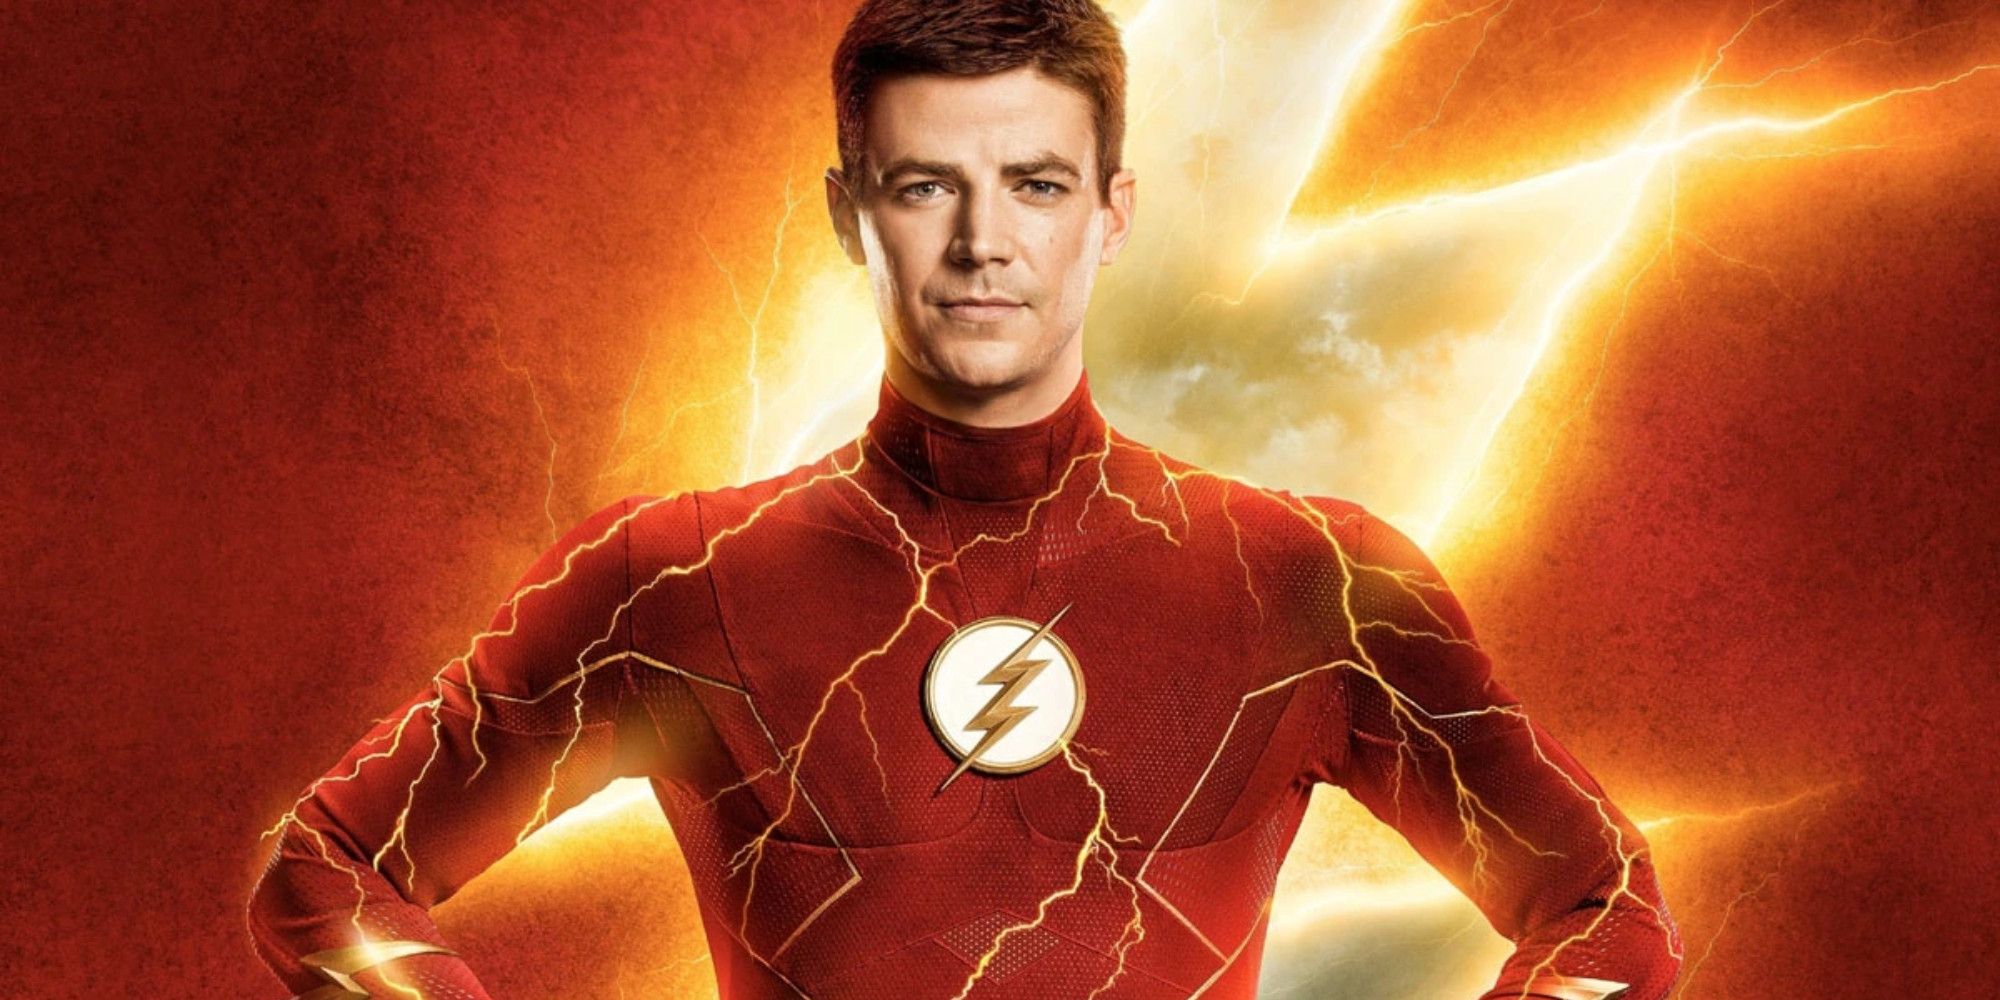 The Flash: Grant Gustin Would Play Another Superhero After Barry Allen